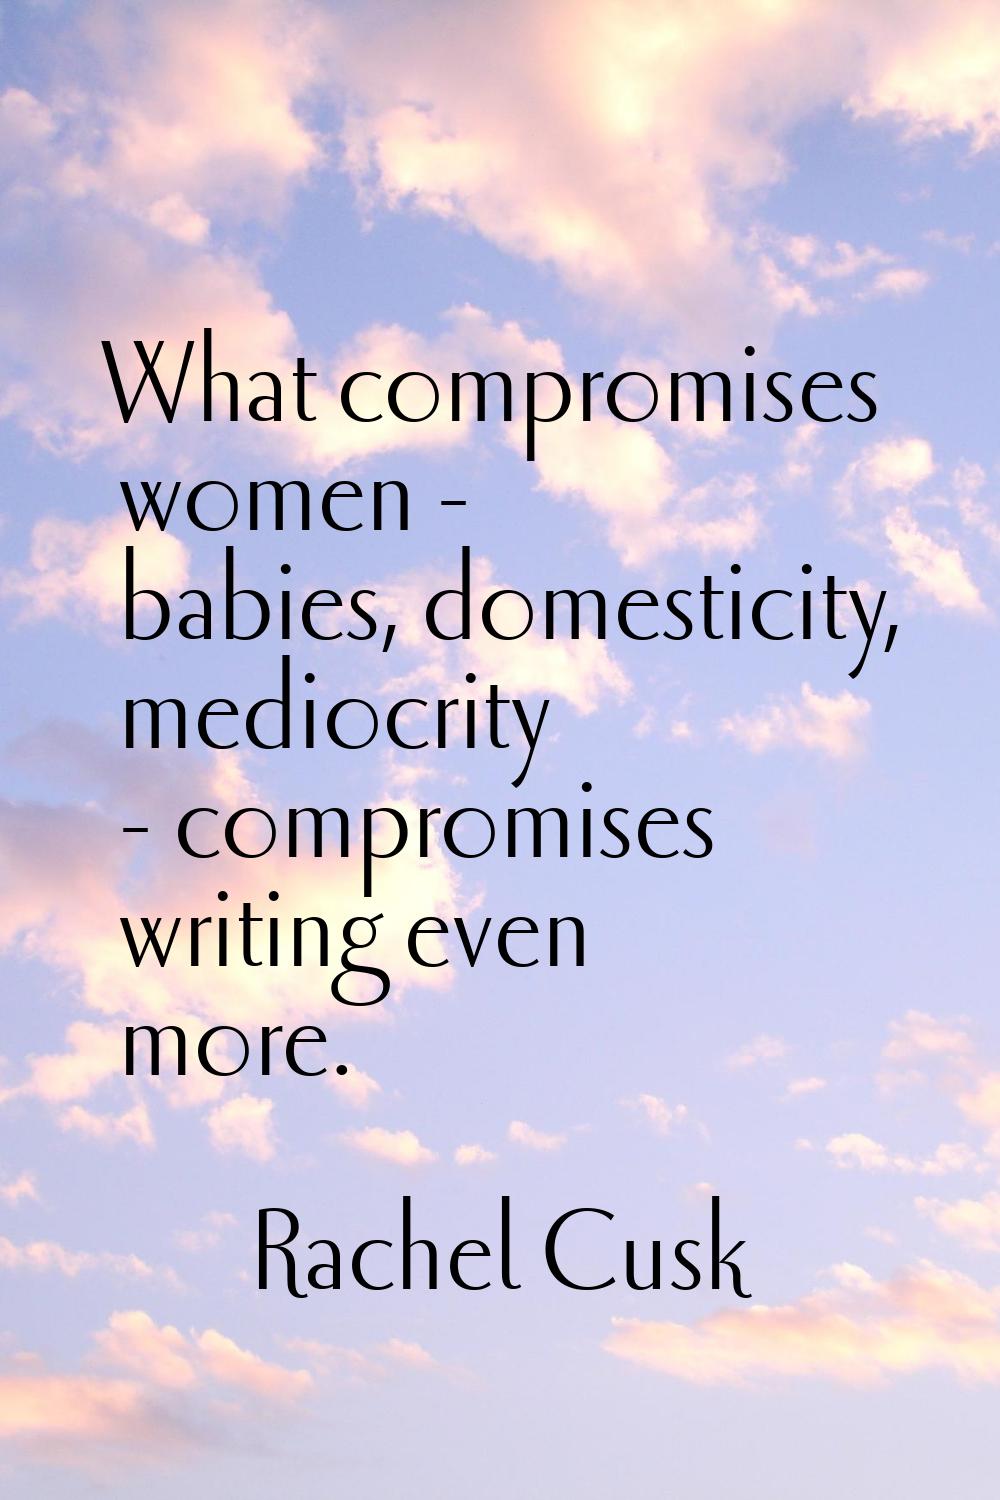 What compromises women - babies, domesticity, mediocrity - compromises writing even more.